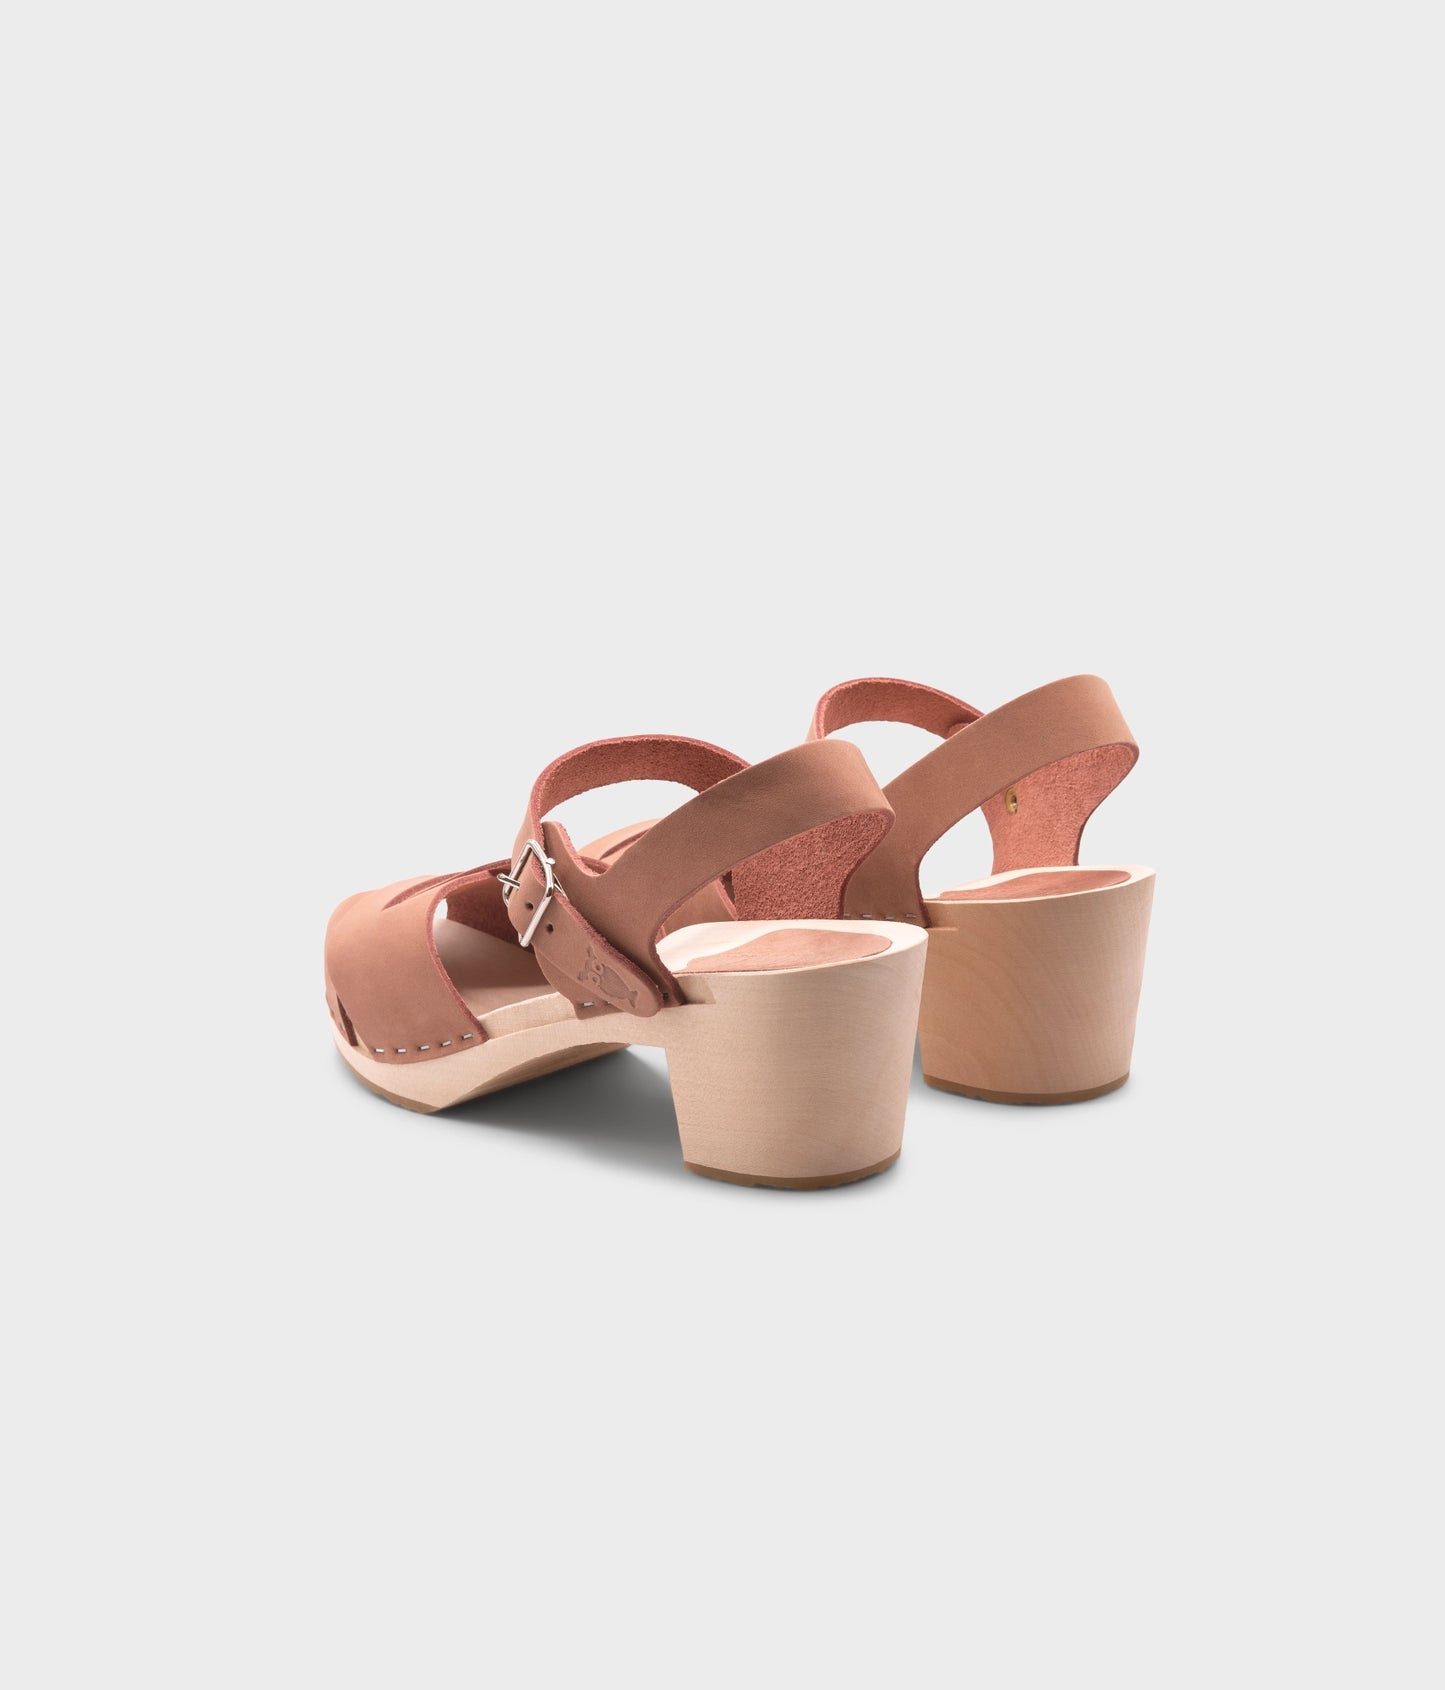 high heeled clog sandals in blush pink nubuck leather with an open-toe stapled on a light wooden base